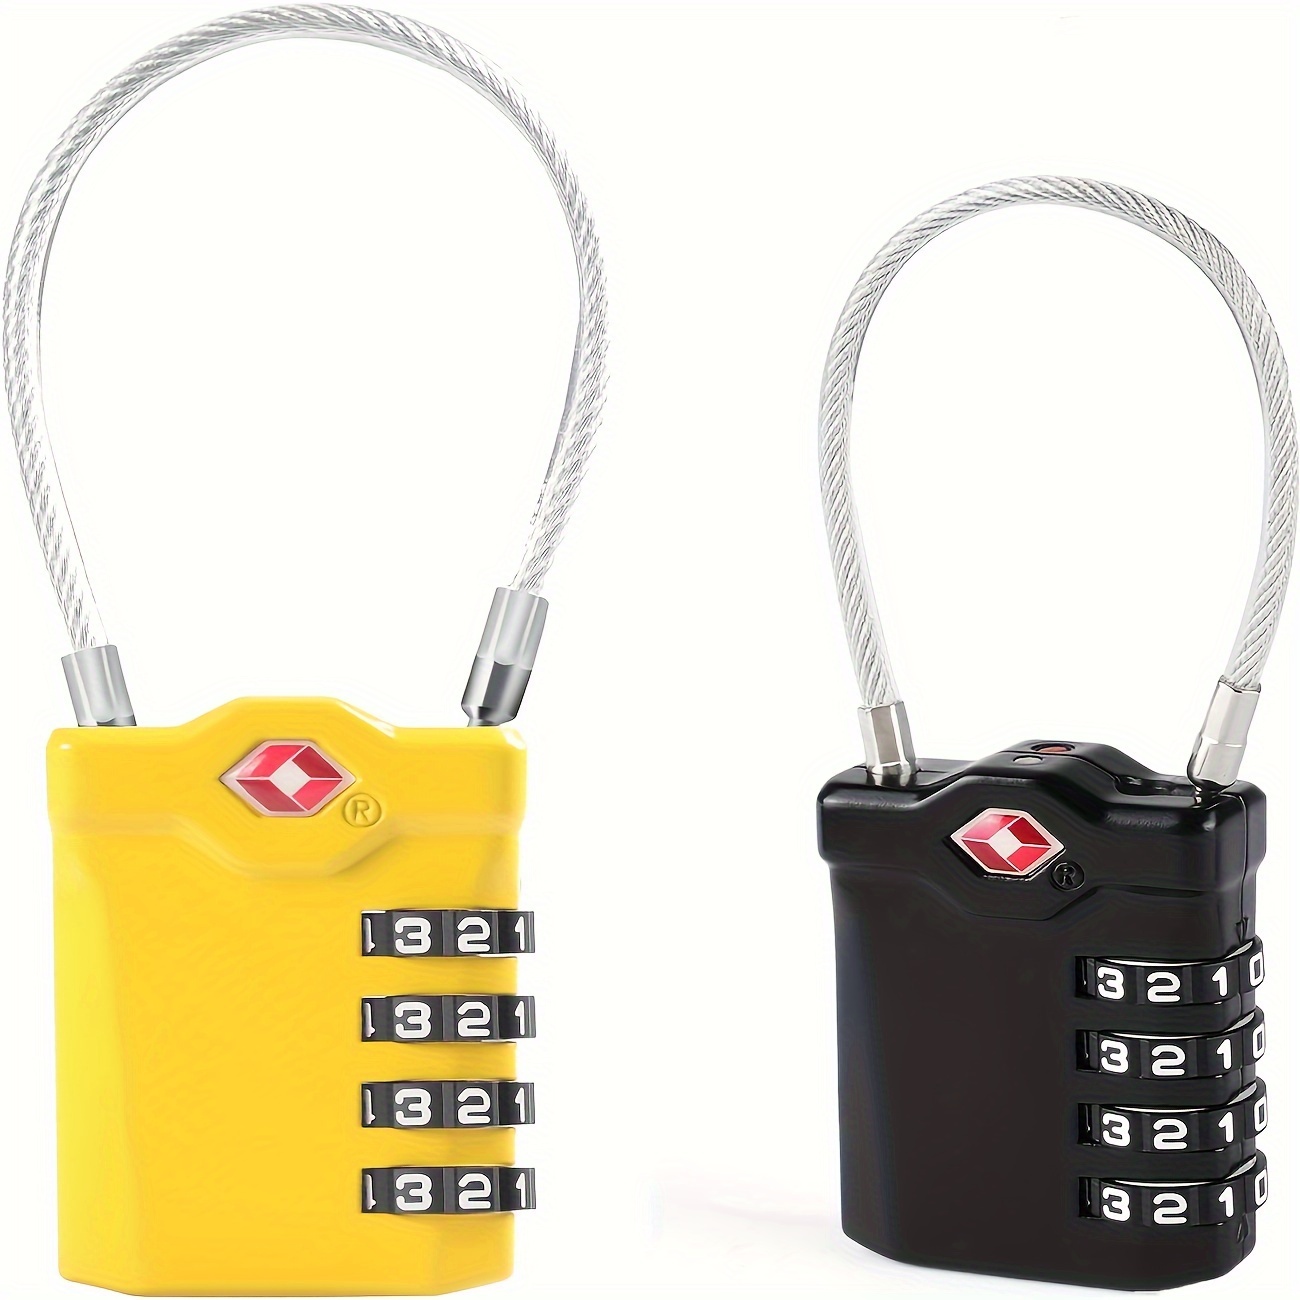 

Tsa Luggage Lock, 2 Pack, 4 Digit Combination Lock Security Padlock Travel Lock With 14cm Flexible Cable For Suitcases, Backpacks, School Or Gym Lockers And More.